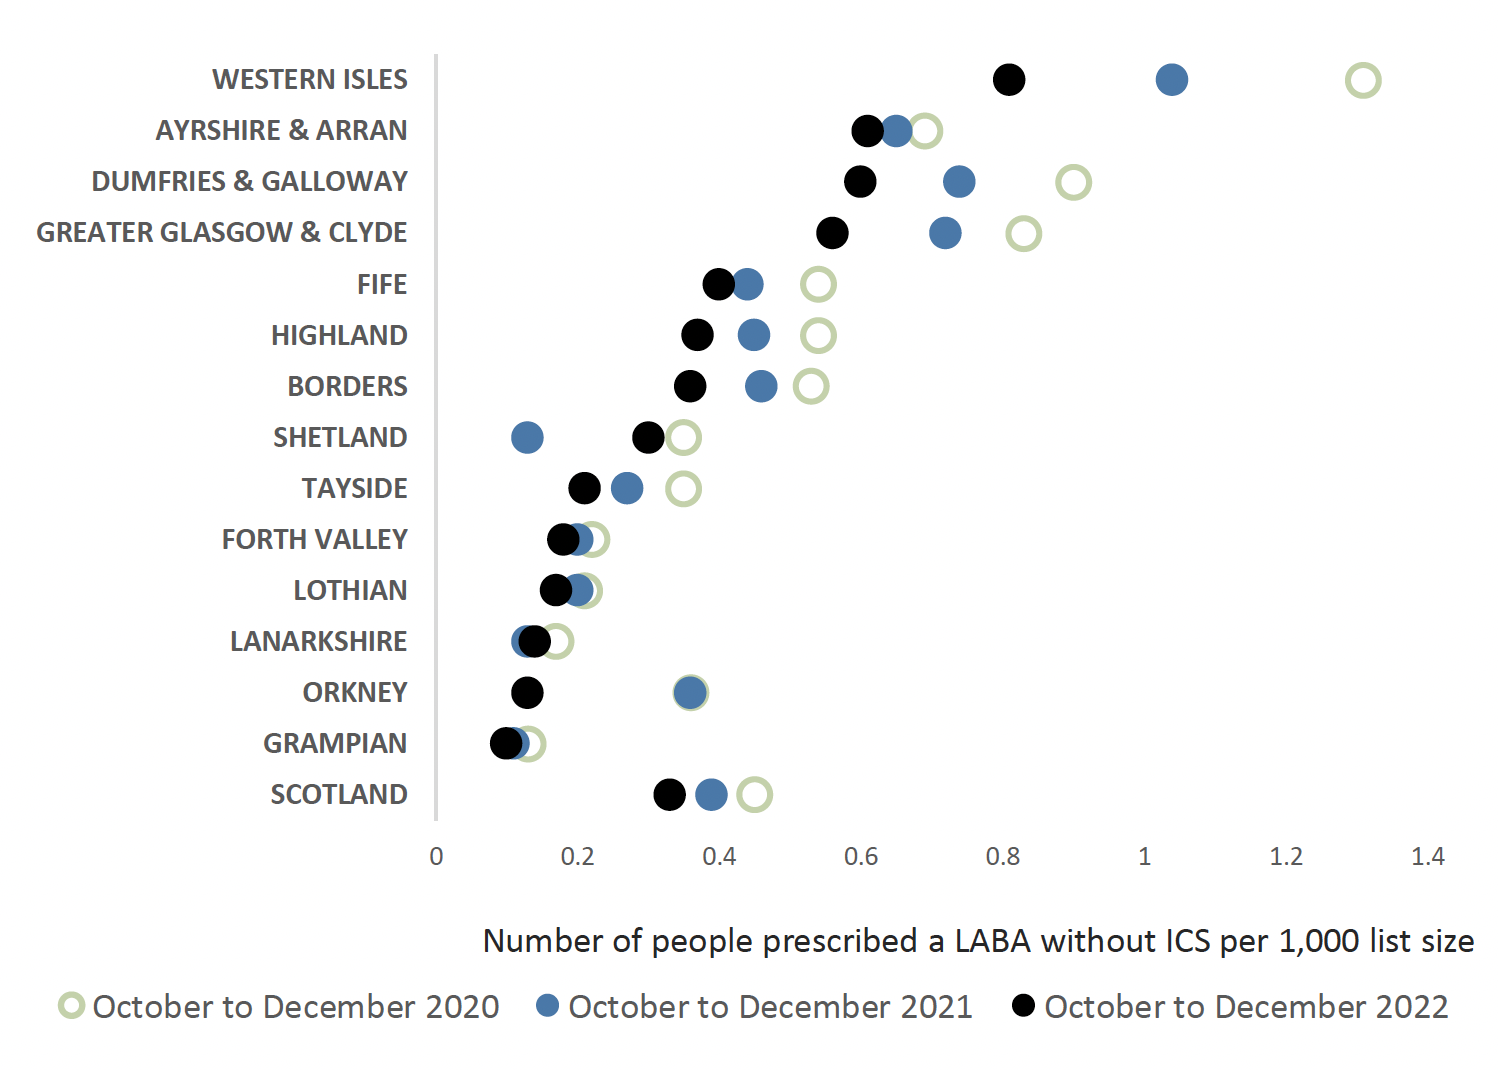 Chart showing people prescribed a LABA without ICS per 1000 patient size compared between health boards and Scotland from 2020 to 2022. Overall Scotland trend is decreasing